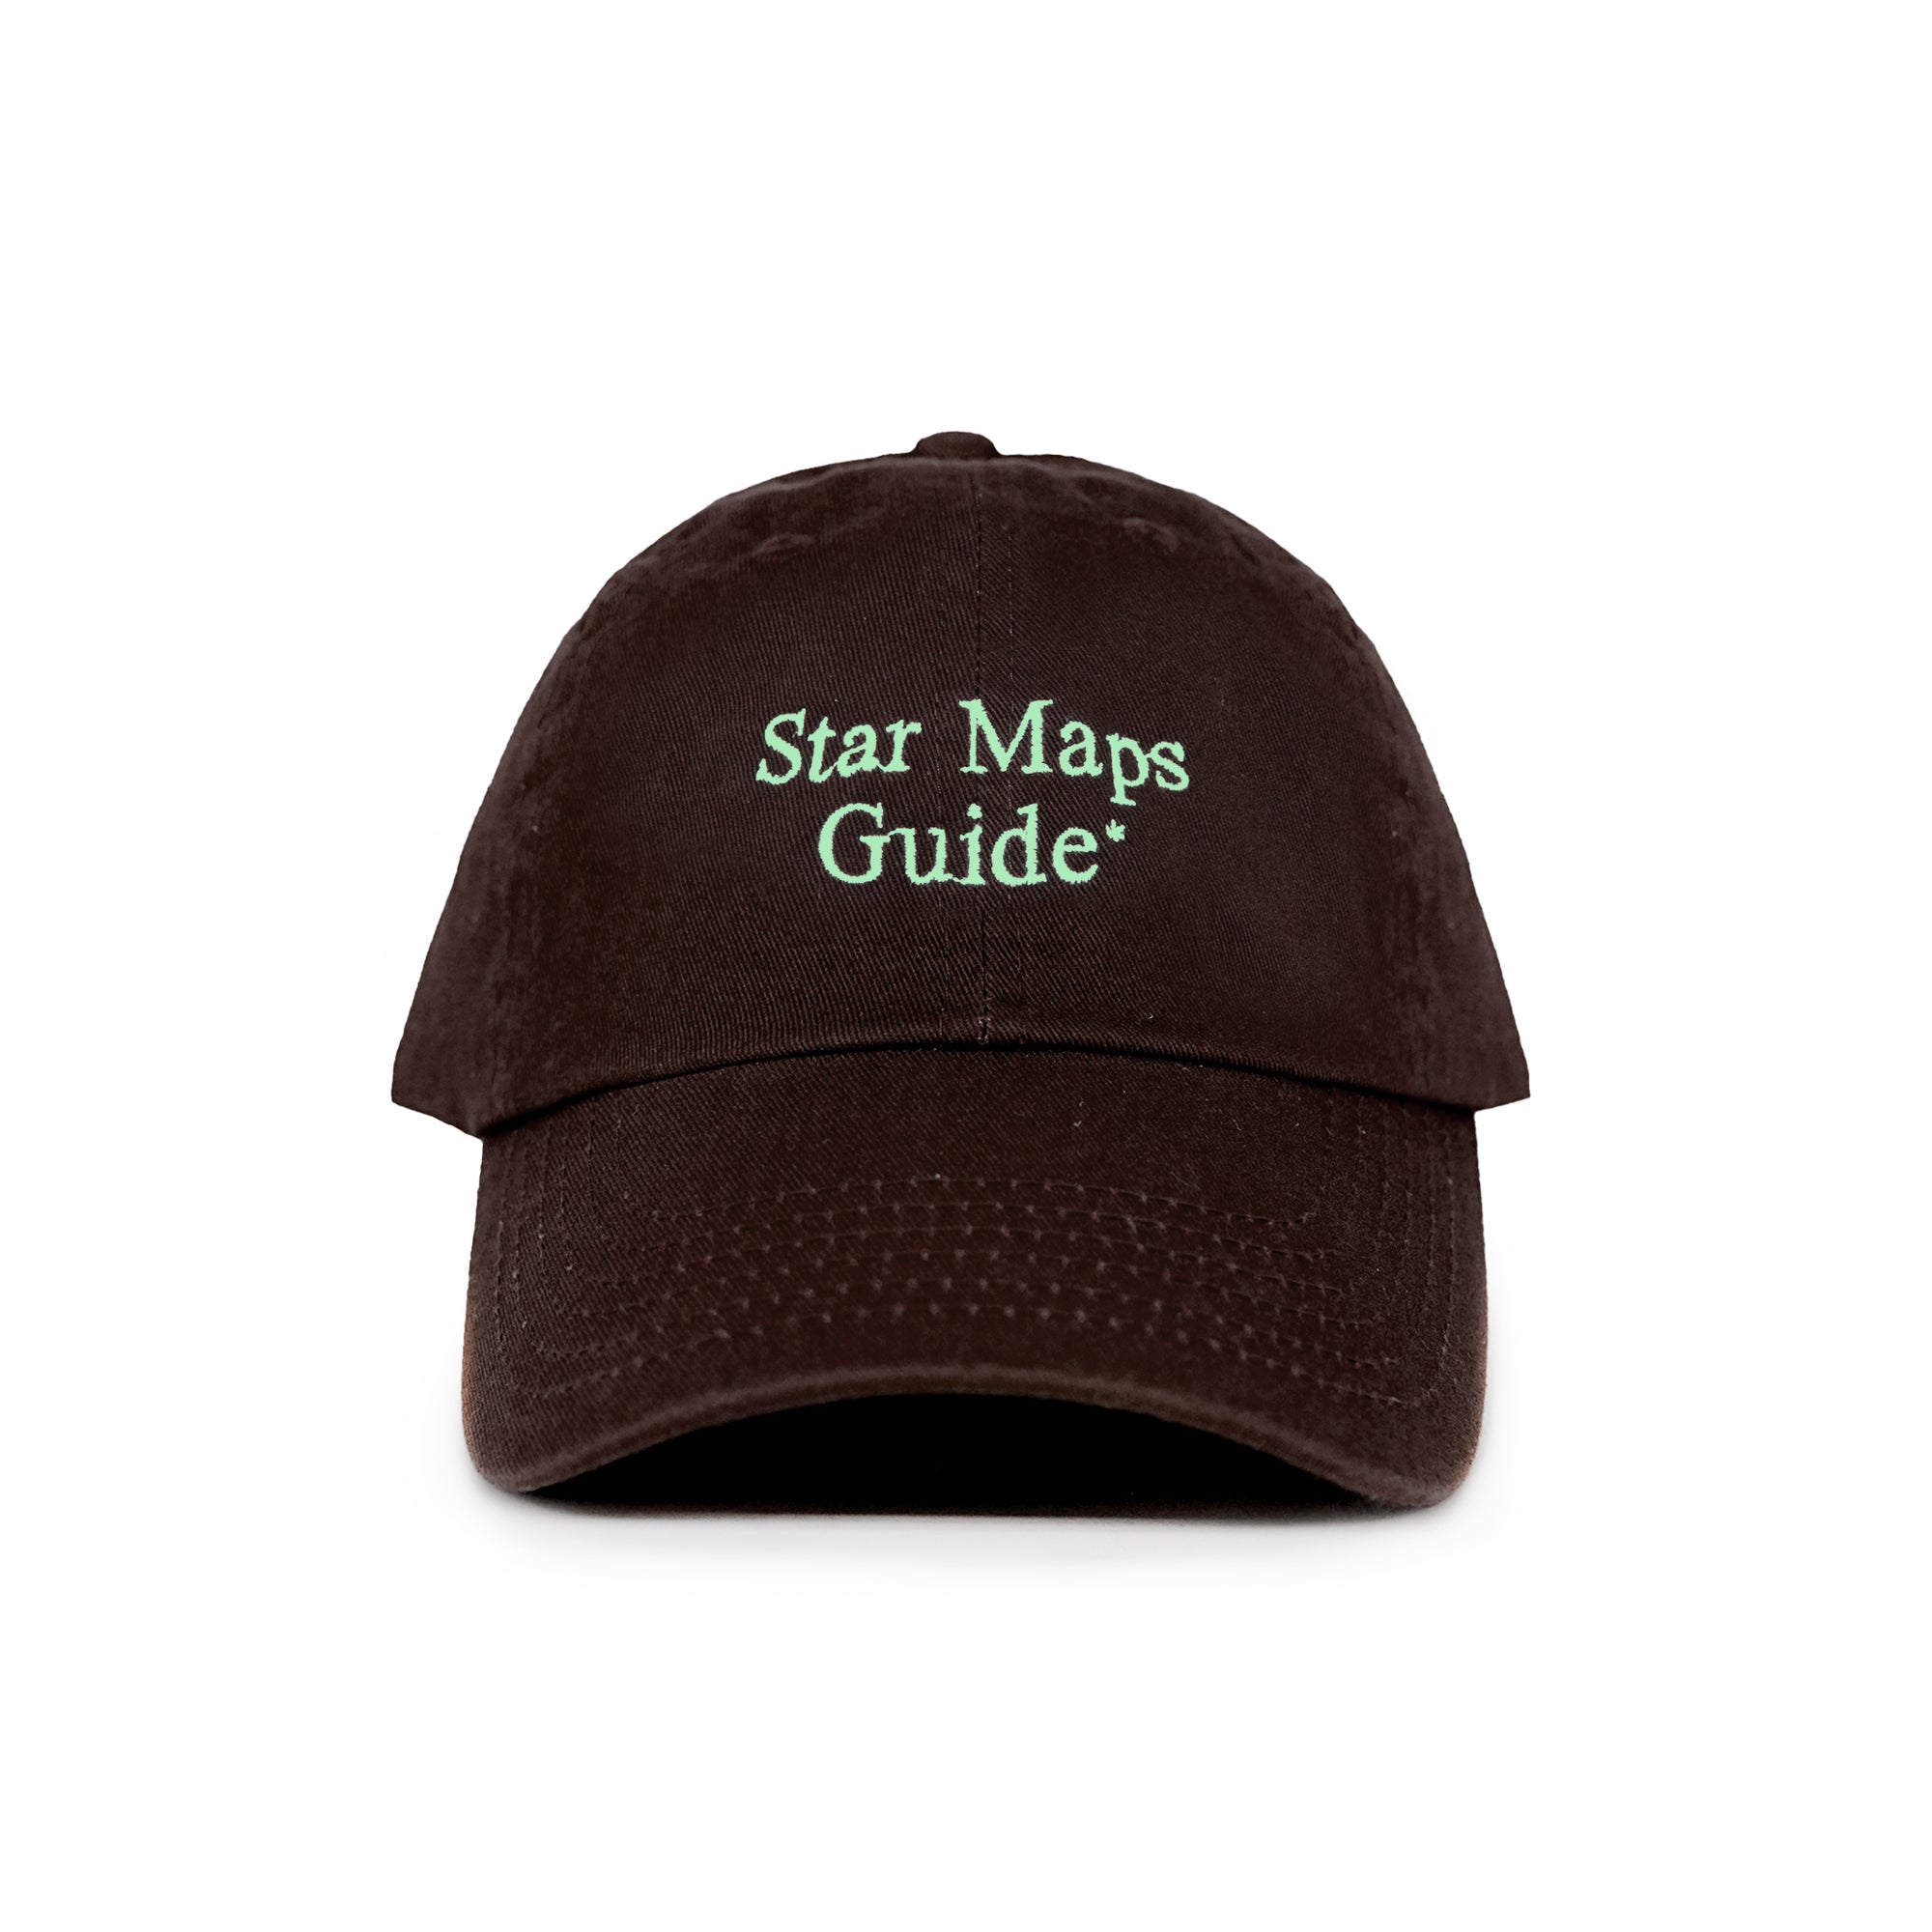 STAR MAPS GUIDE